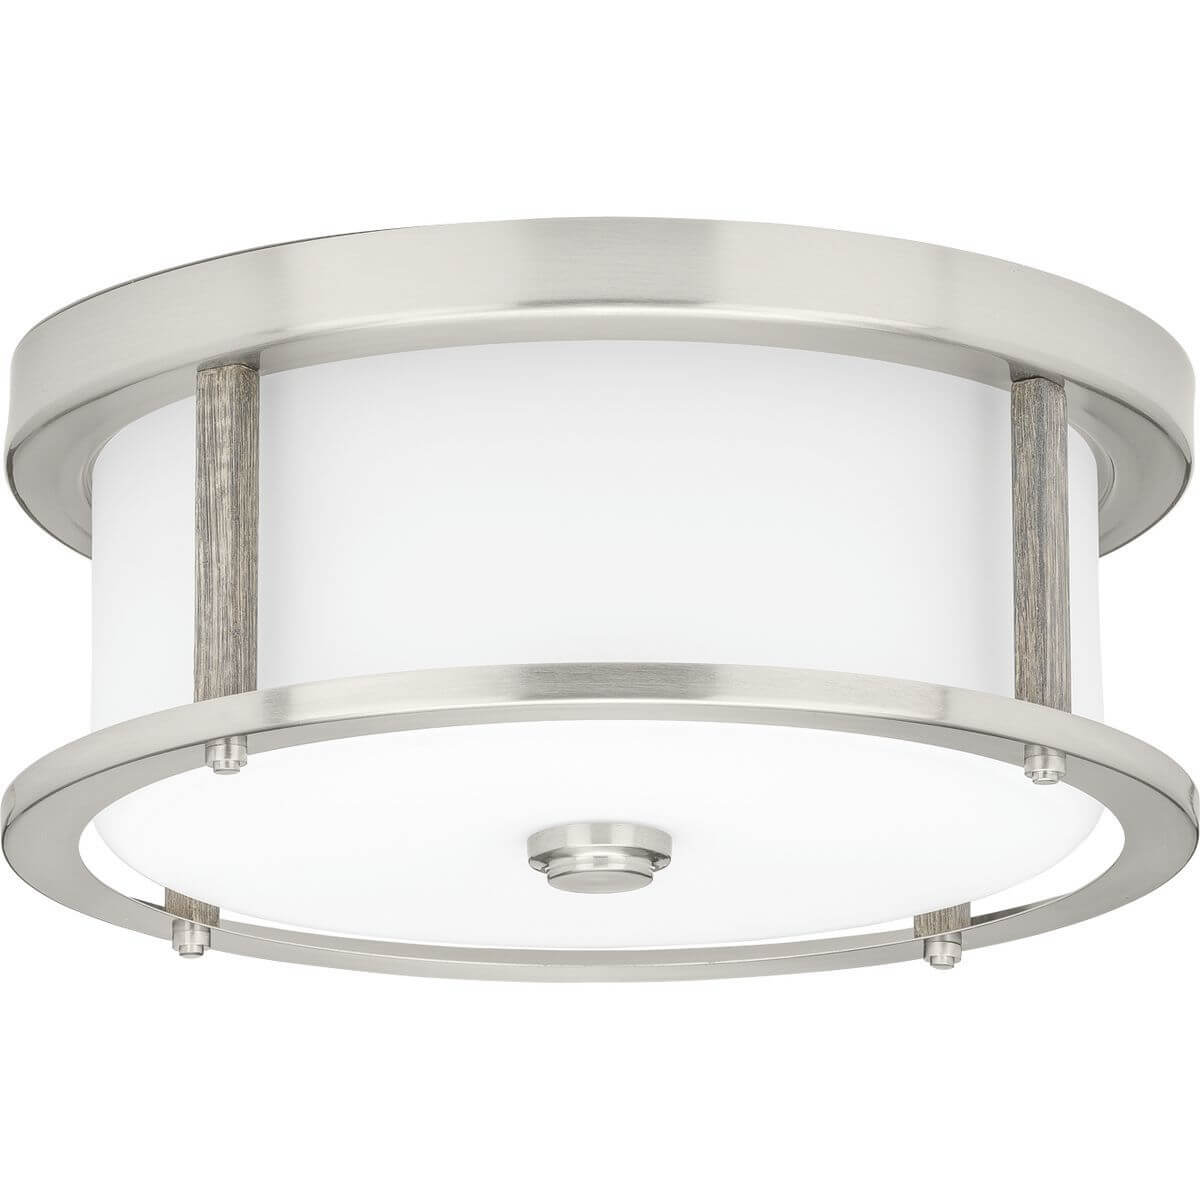 Progress Lighting P350144-009 Mast 2 Light 13 inch Flush Mount in Brushed Nickel with Clear and Etched White Glass